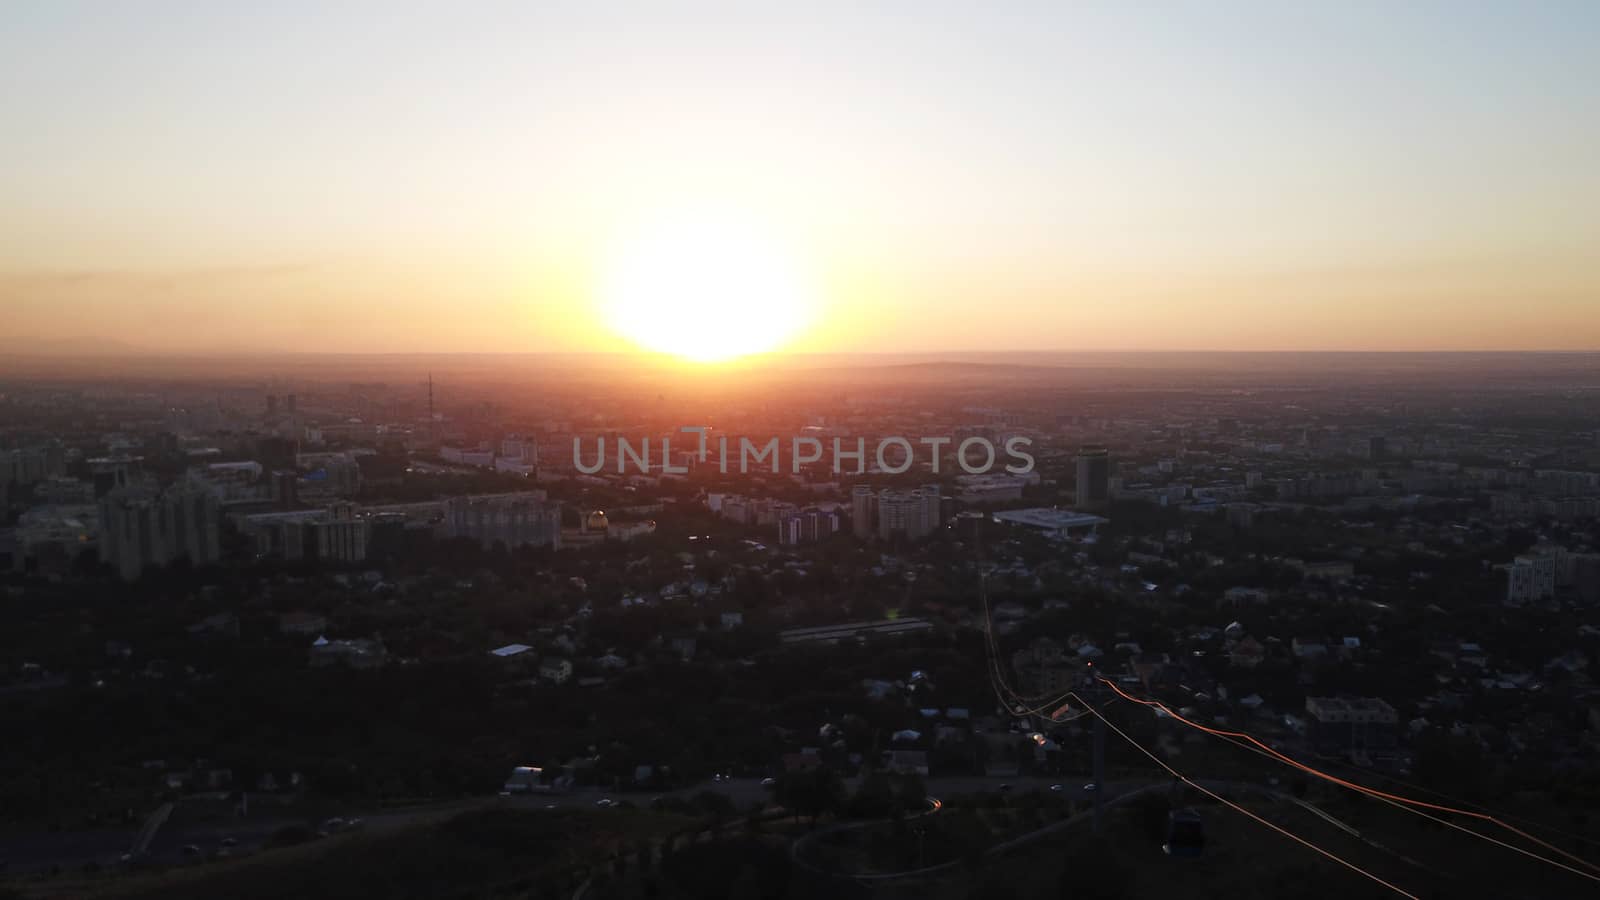 Red sunset over the city of Almaty. Clouds shimmer with different colors from yellow-red to blue. The city is plunged into darkness. Night falls. Lights are on, cars are driving. The view from the top